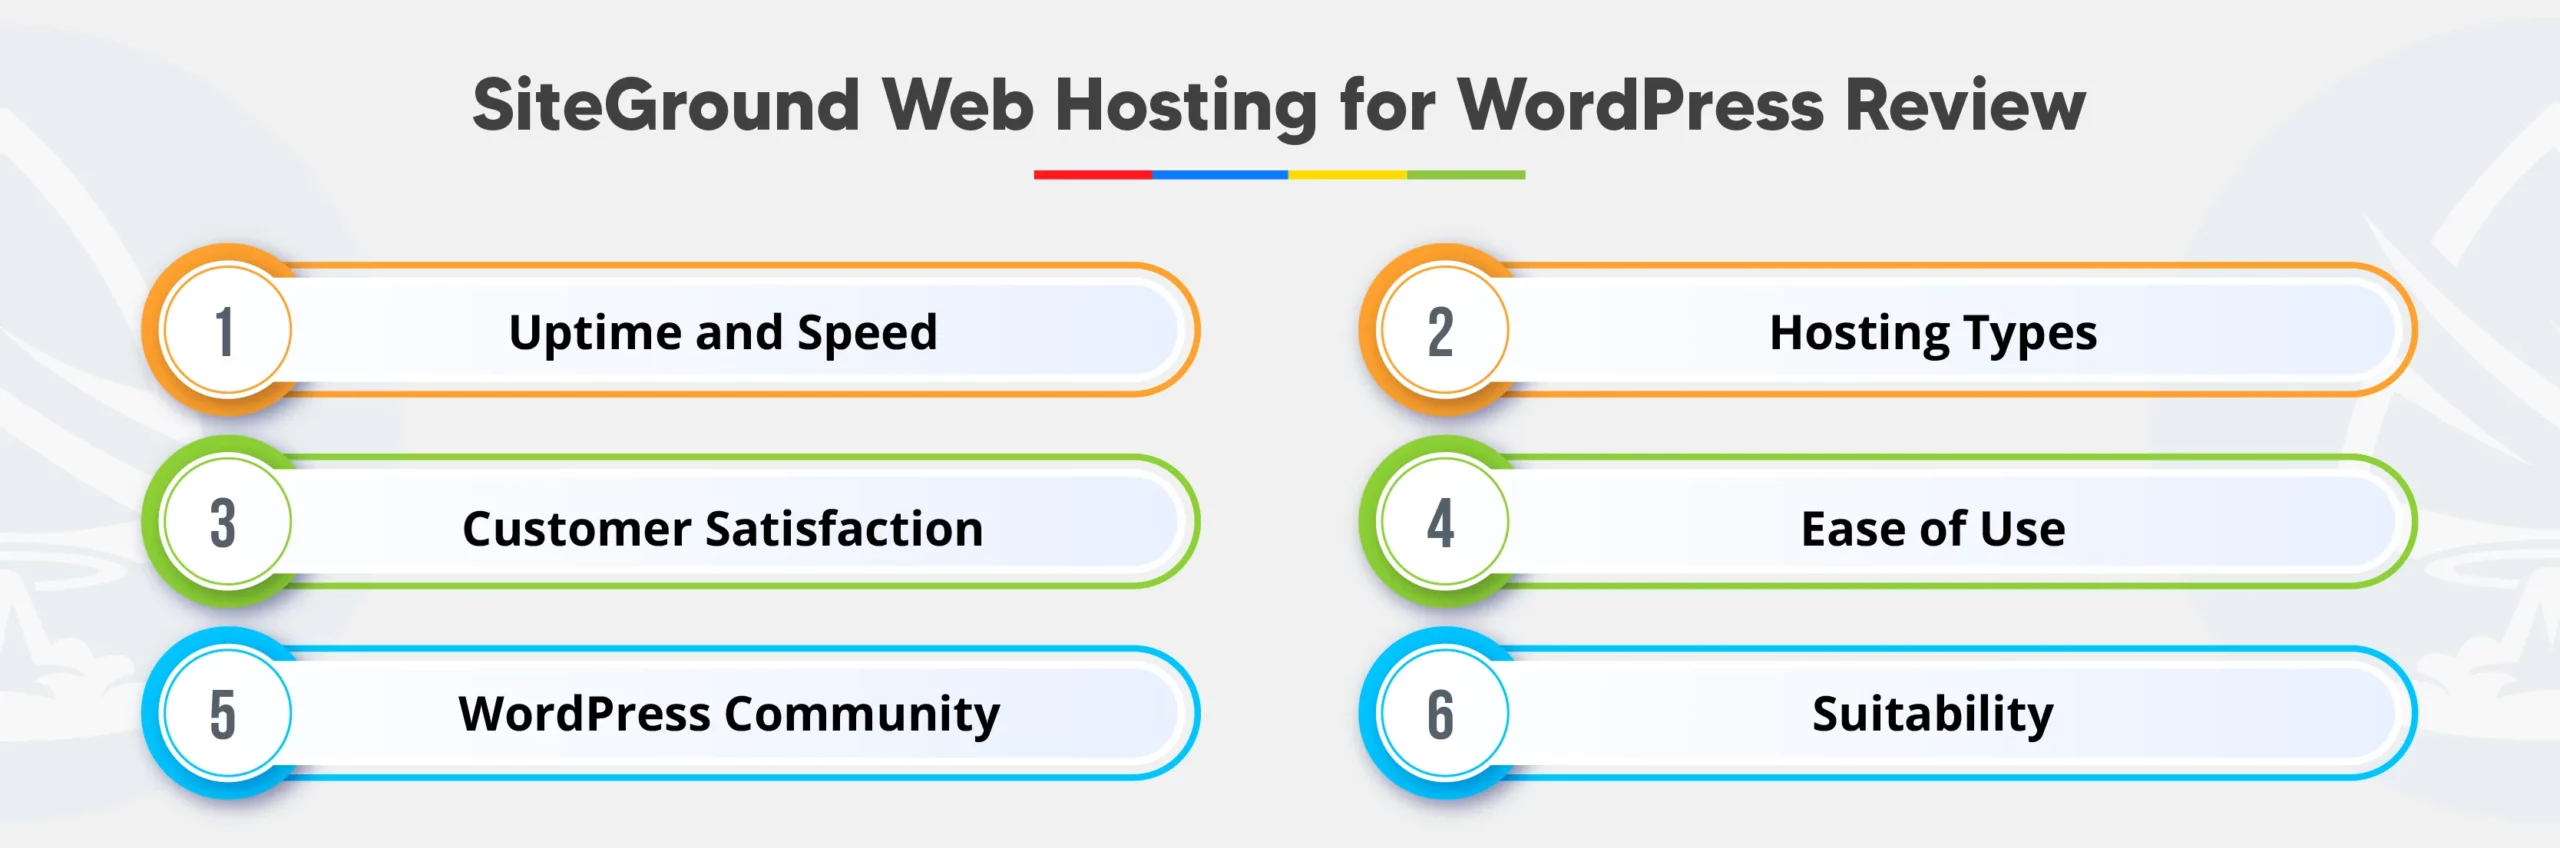 SiteGround Web Hosting for WordPress Review